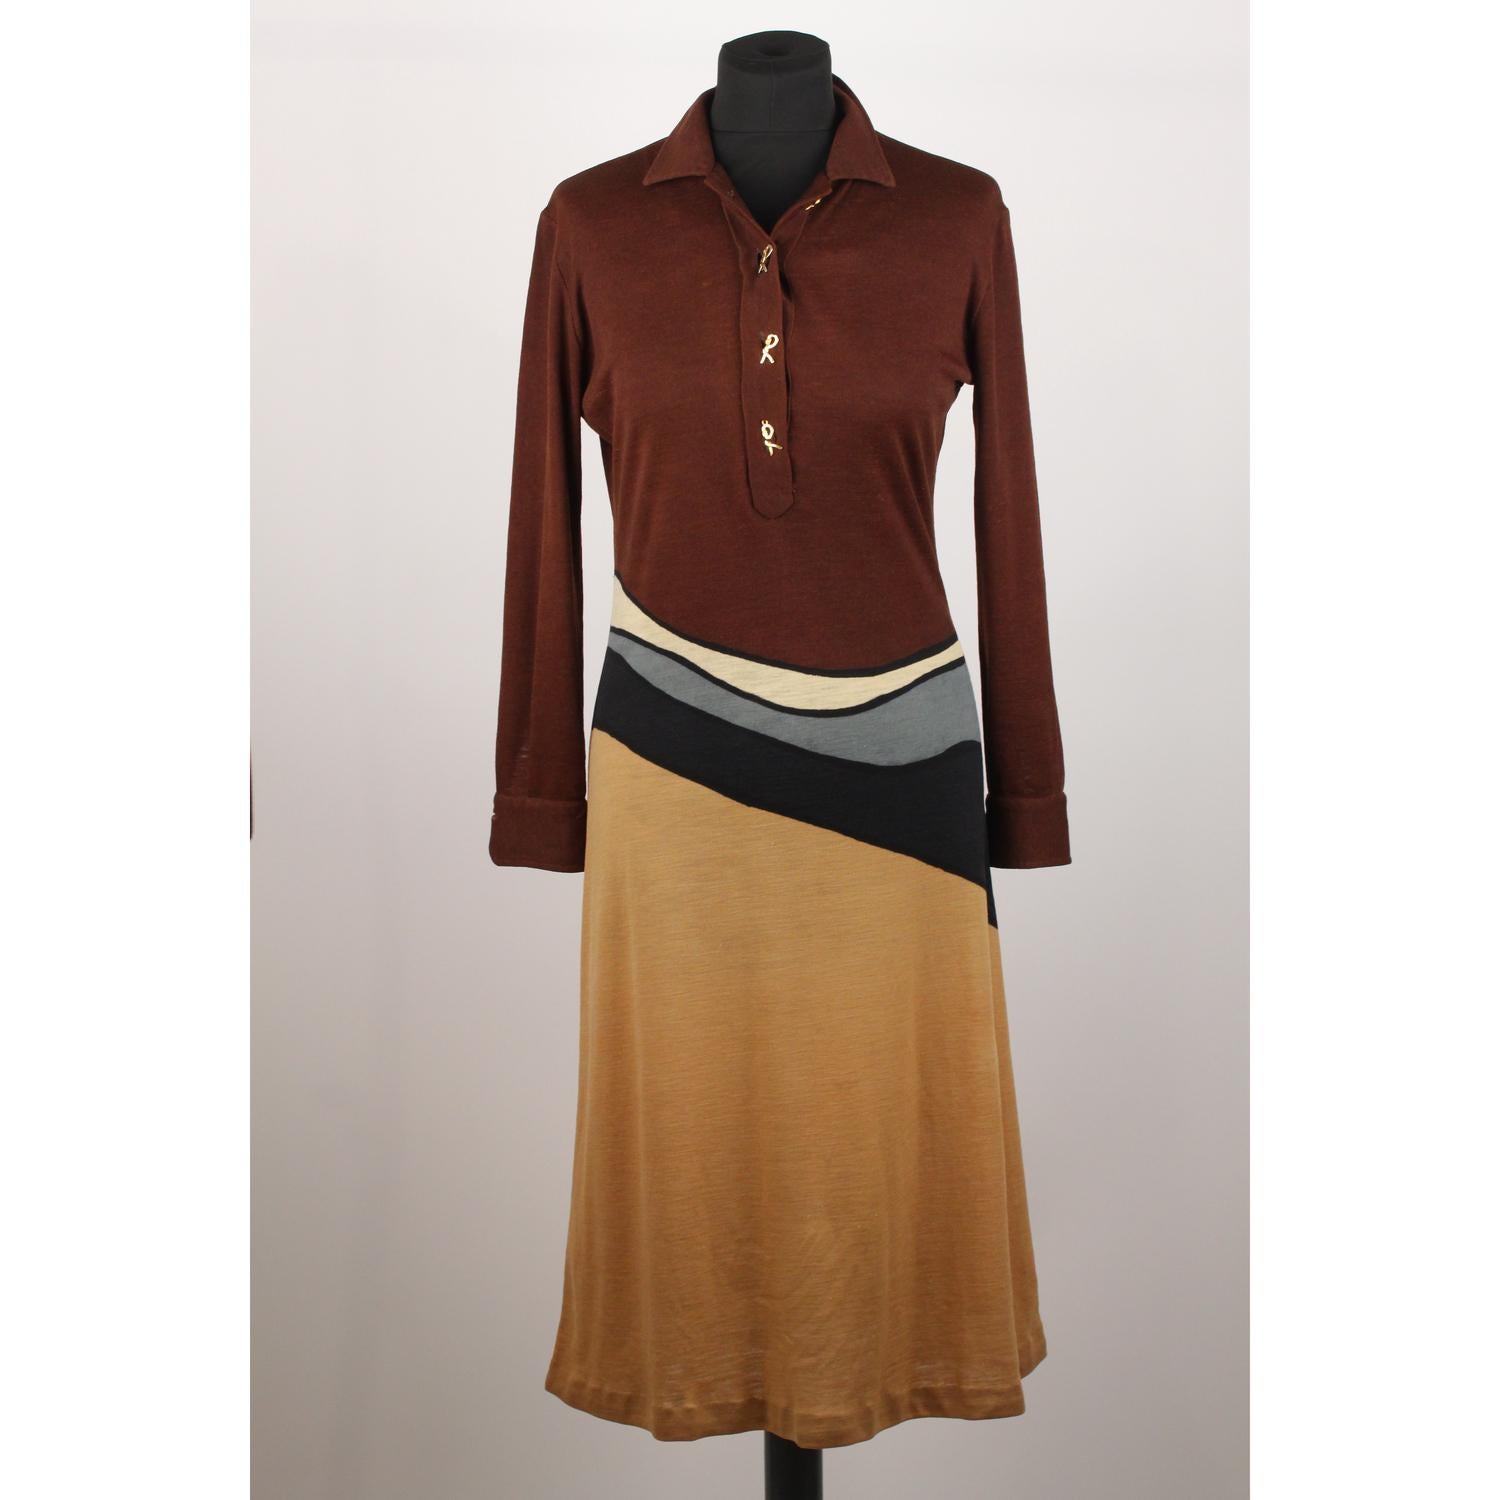 - Printed dress in brown colourway by Roberta de Camerino
- Logo R gold metal button
- Long Sleeve styling with buttoned cuffs
- Shirt collar
- Composition tag is missing! it seems to be a wool blend fabric, slightly stretch
- Unlined
- Circa